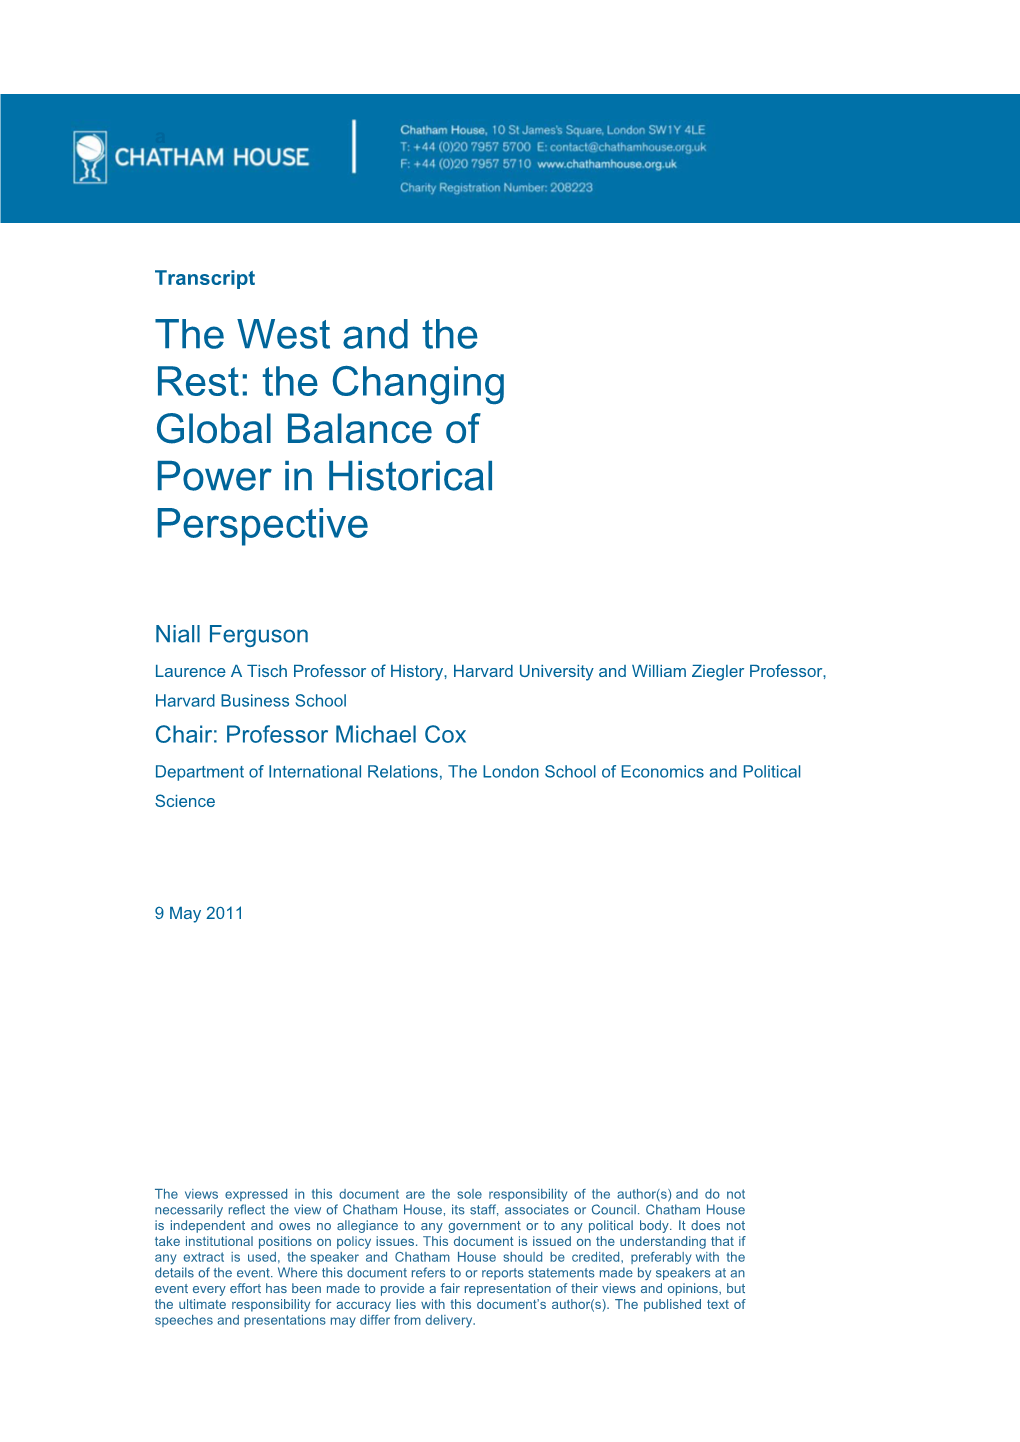 The West and the Rest: the Changing Global Balance of Power in Historical Perspective